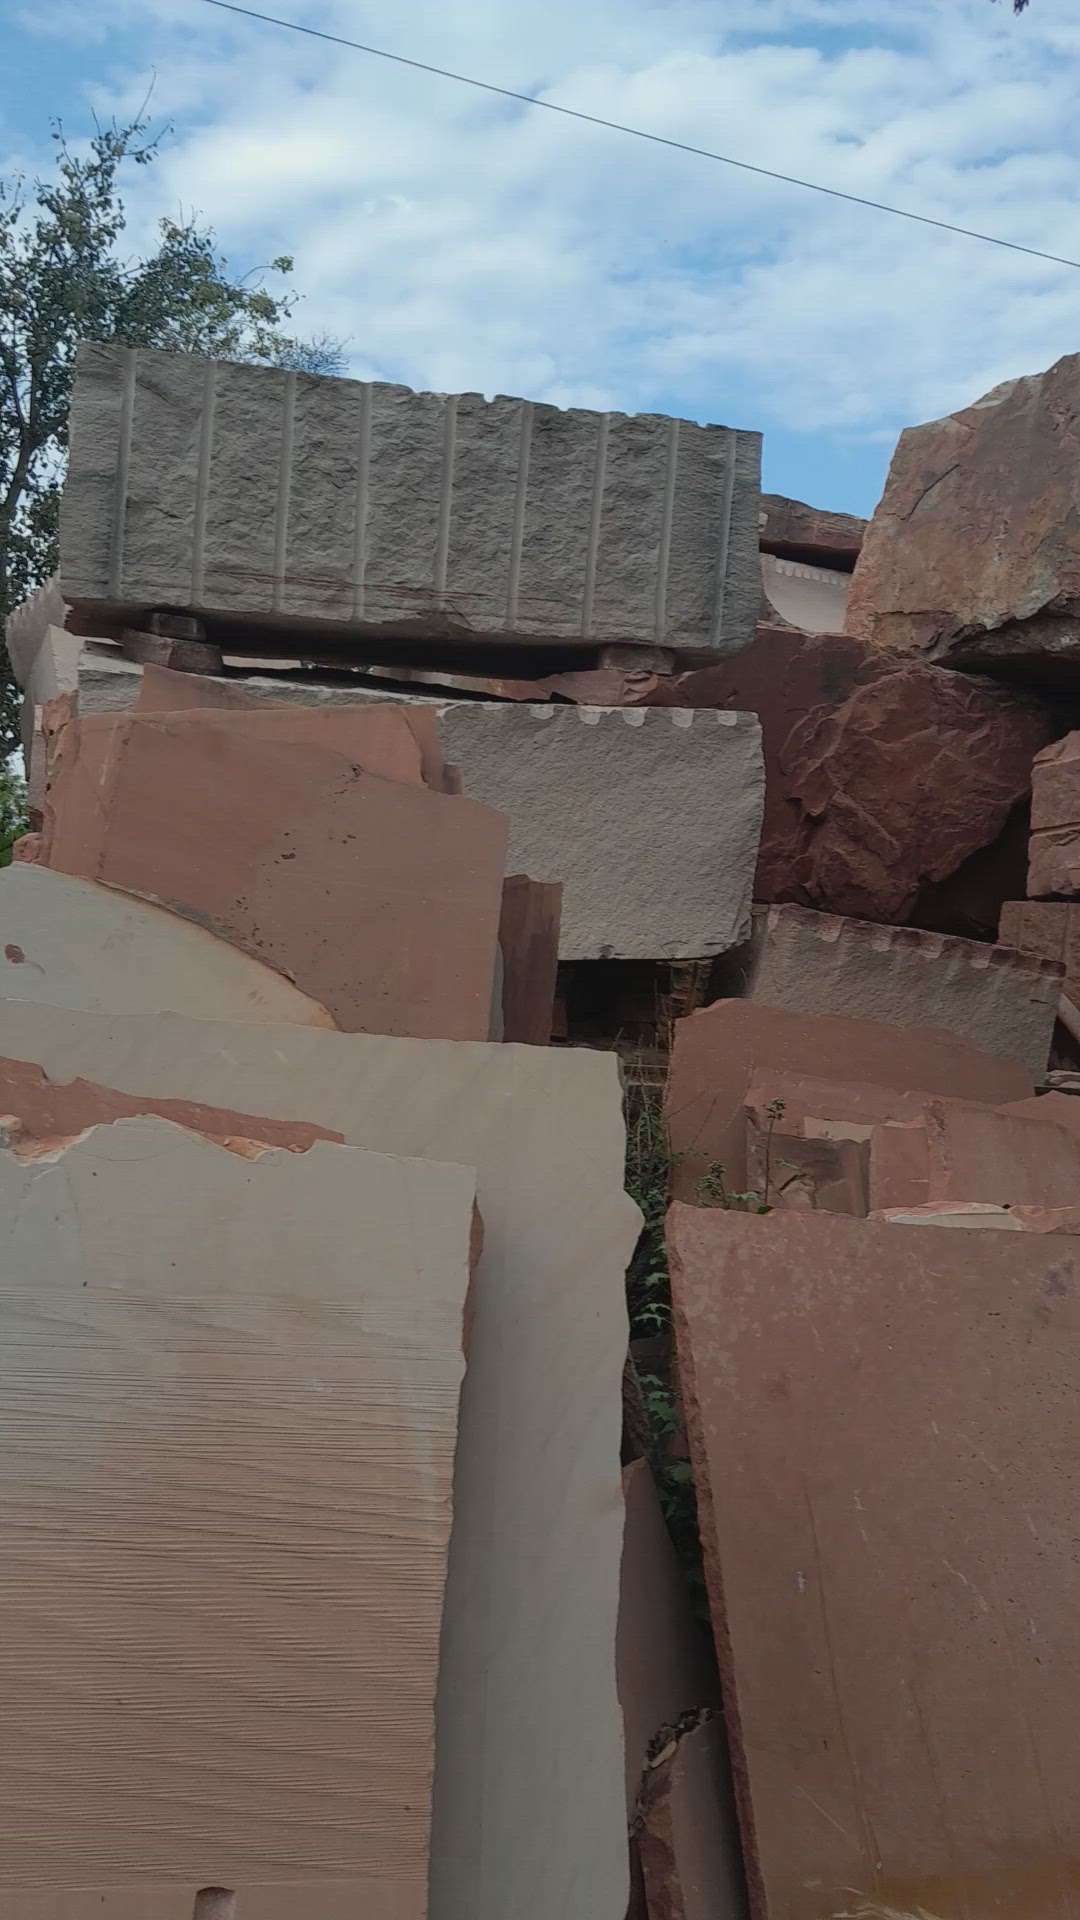 dholpur and red sand stone stocks